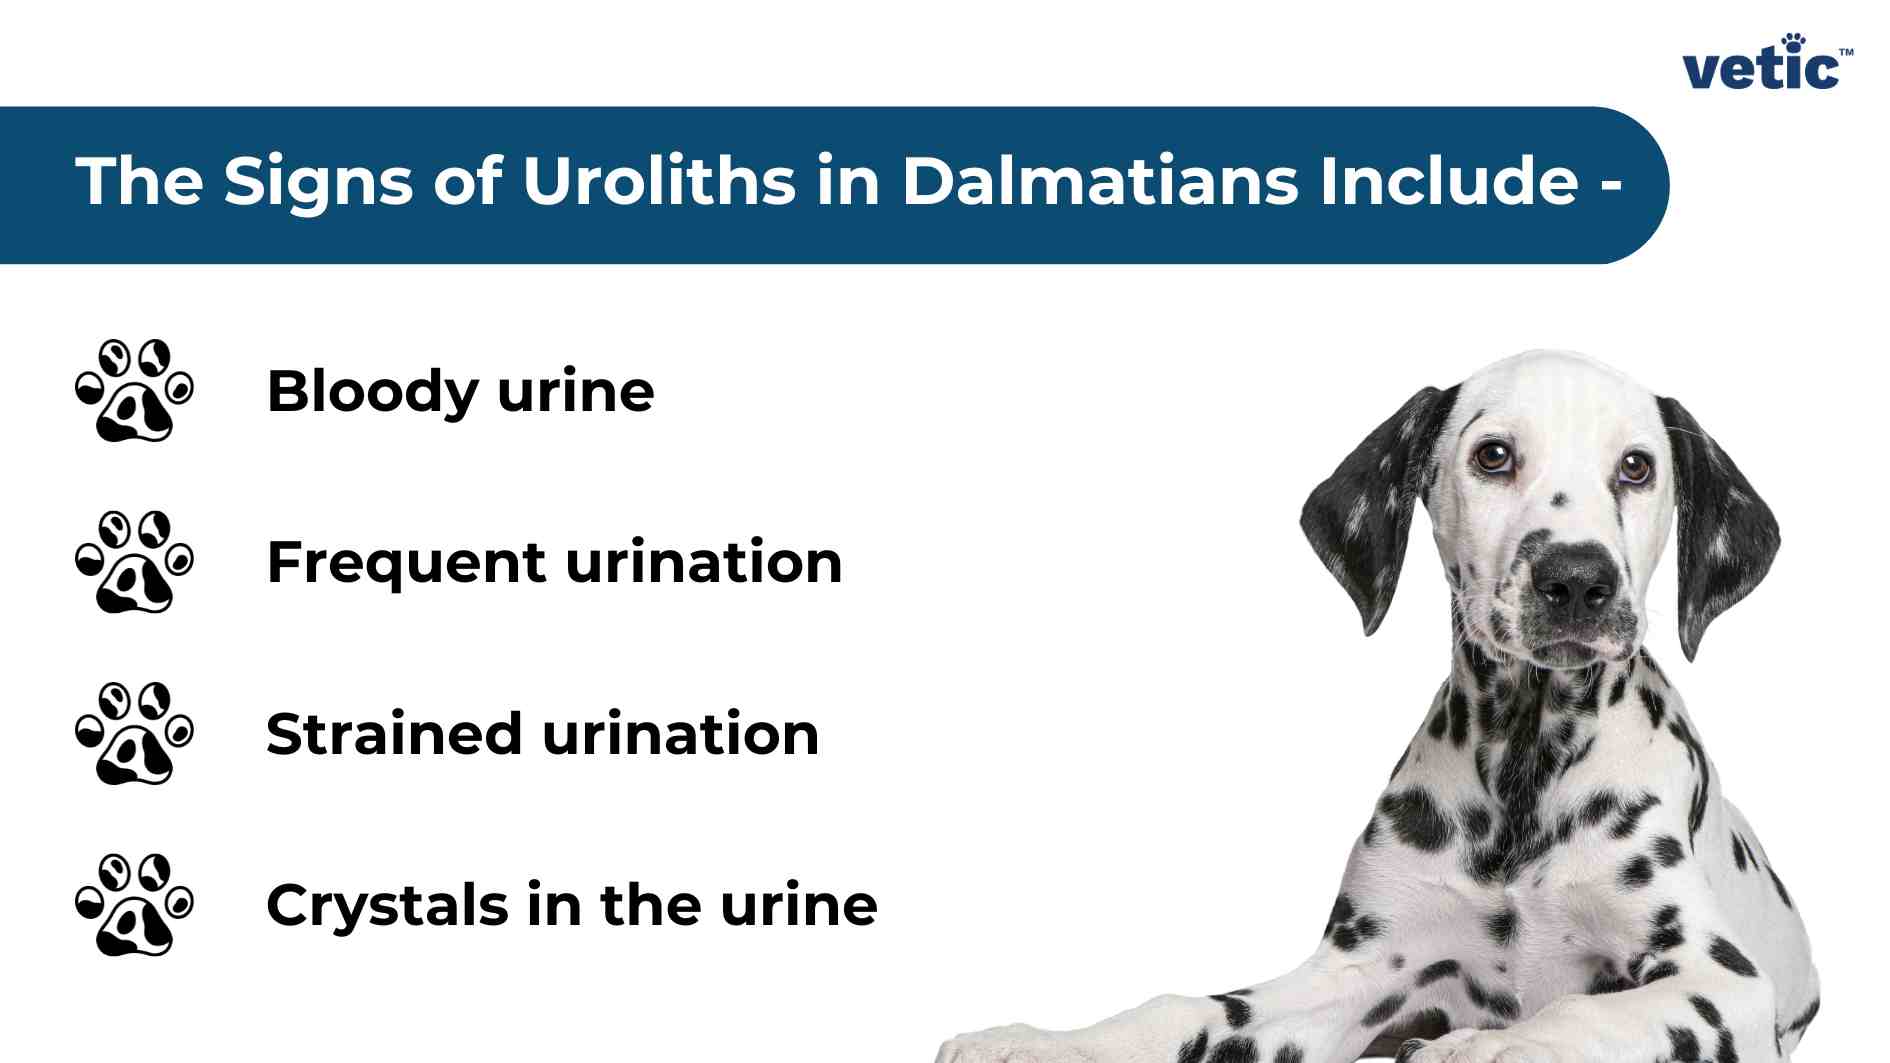 The image is informational and contains text at the top that reads “The Signs of Uroliths in Dalmatians Include -”. Below the title, there are four bullet points listed with paw print icons before each point. The points include: Bloody urine Frequent urination Strained urination Crystals in the urine On the right side of the image, there is a picture of a Dalmatian dog sitting down. It is a copyright image from Vetic